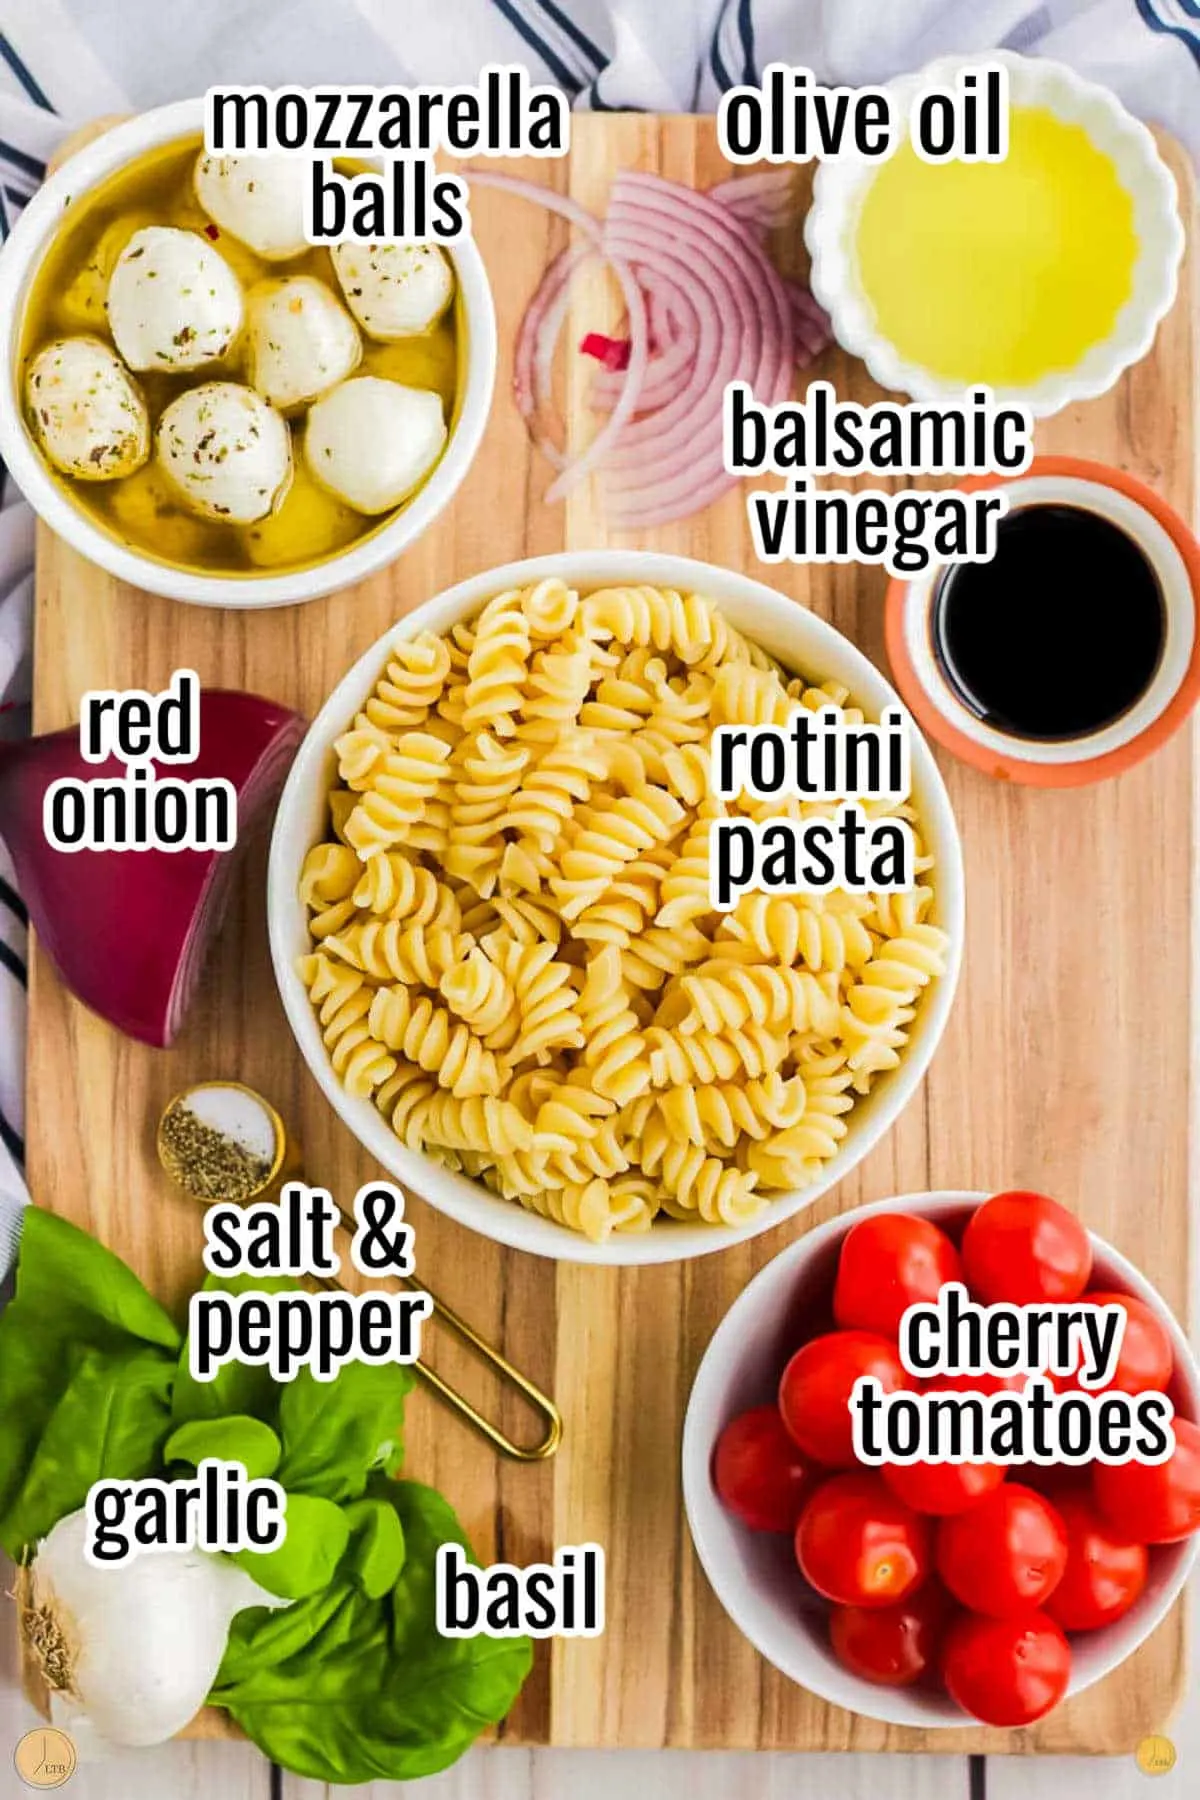 ingredients for a simple recipe that include a pint cherry tomatoes, favorite pasta shape, and pine nuts